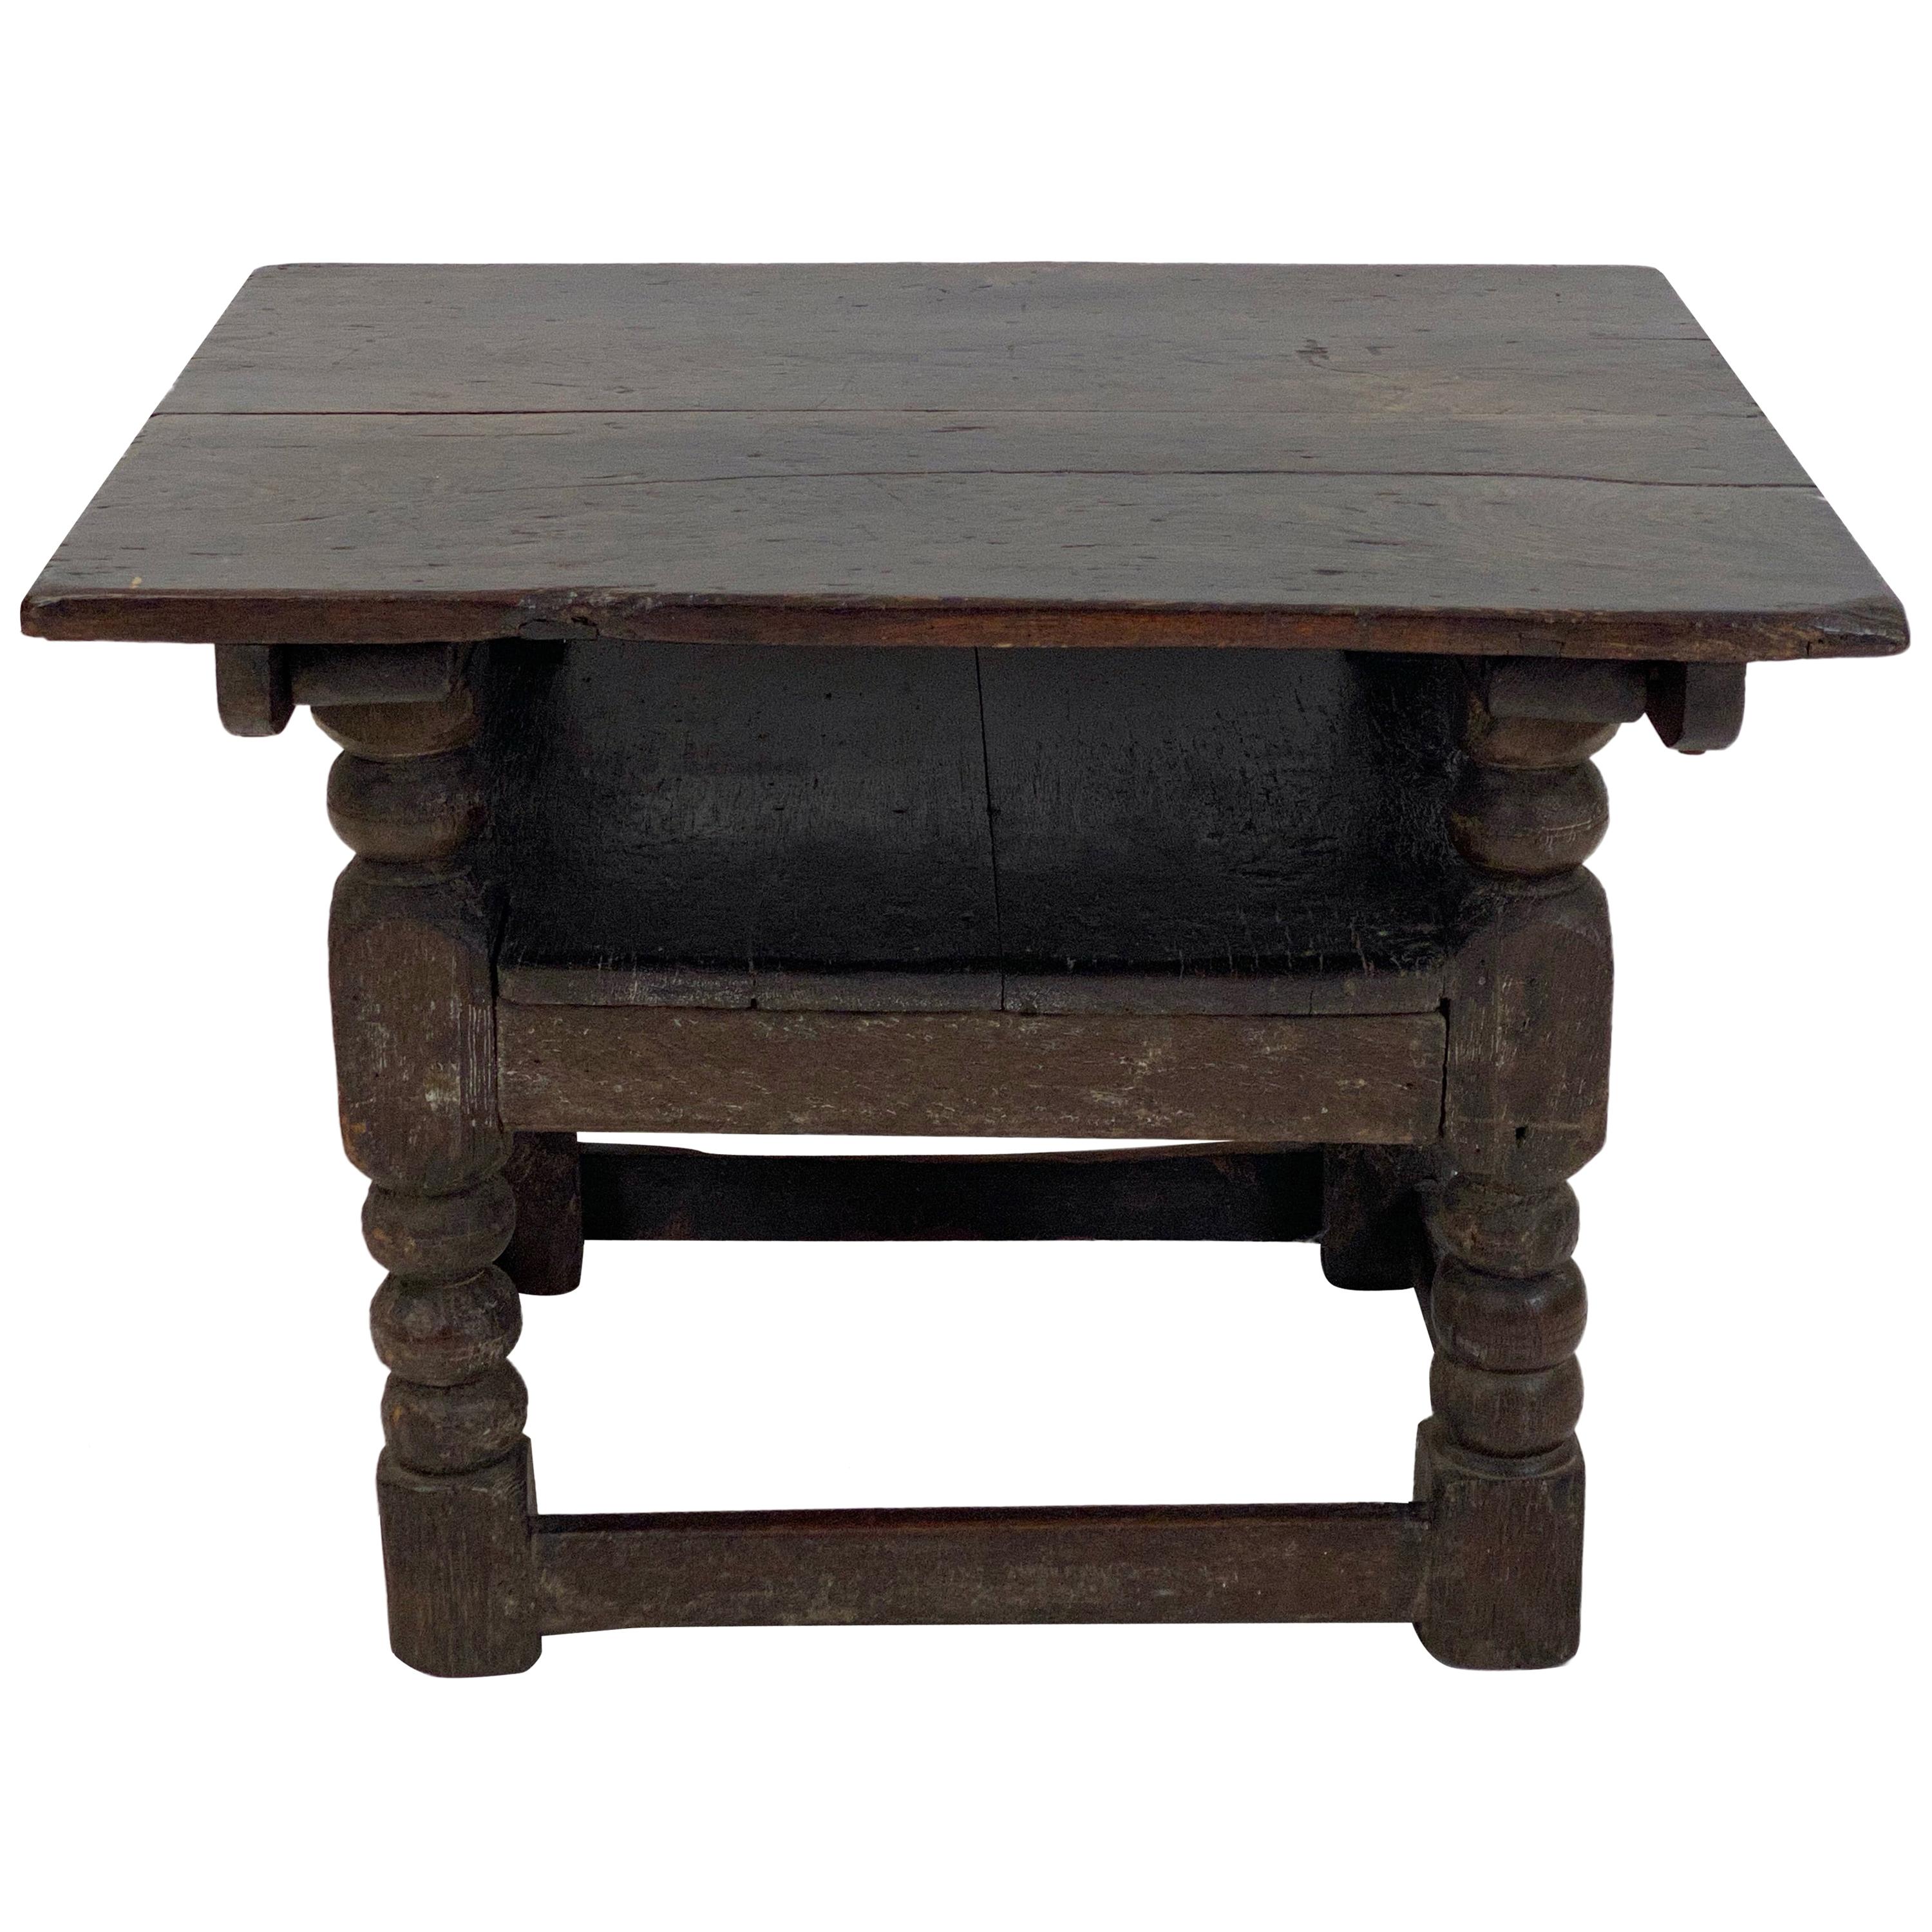 Antique Brutalist English Oak Refectory Table, 18 th Century For Sale